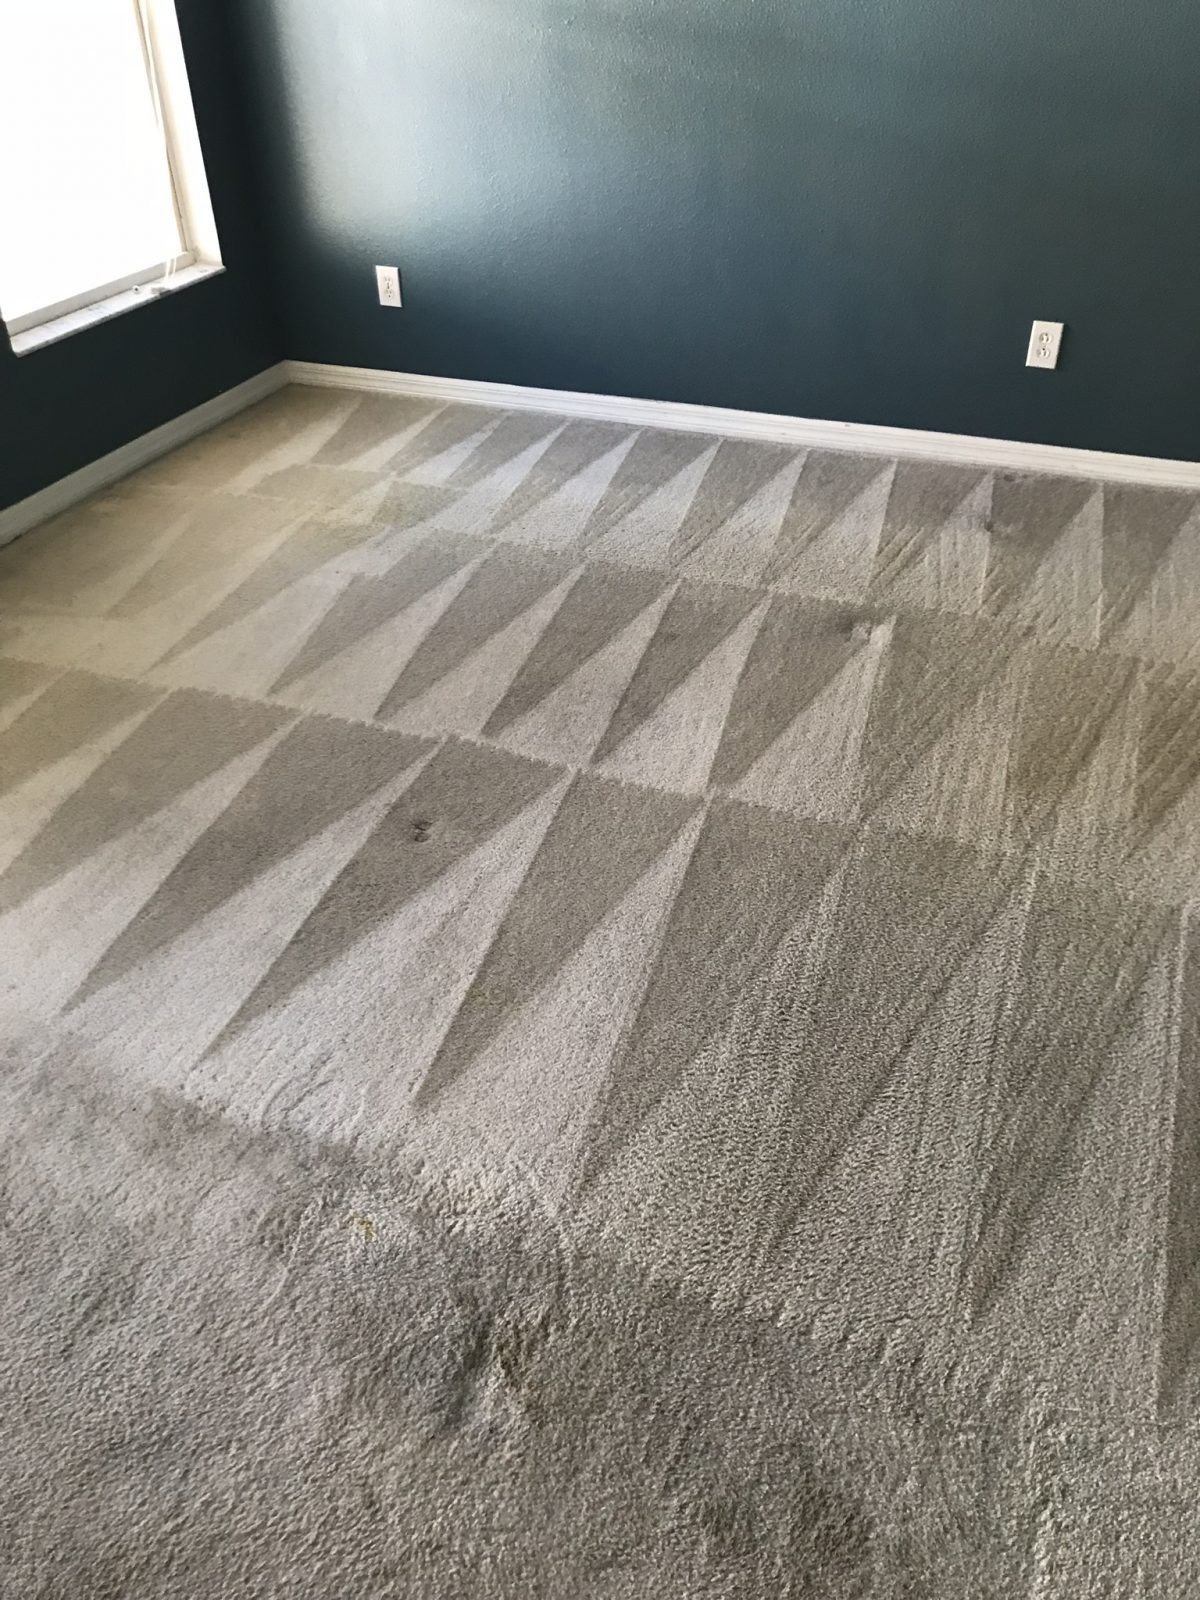 Professional Carpet Cleaning Amberley Ohio by Howards Cleaning Service